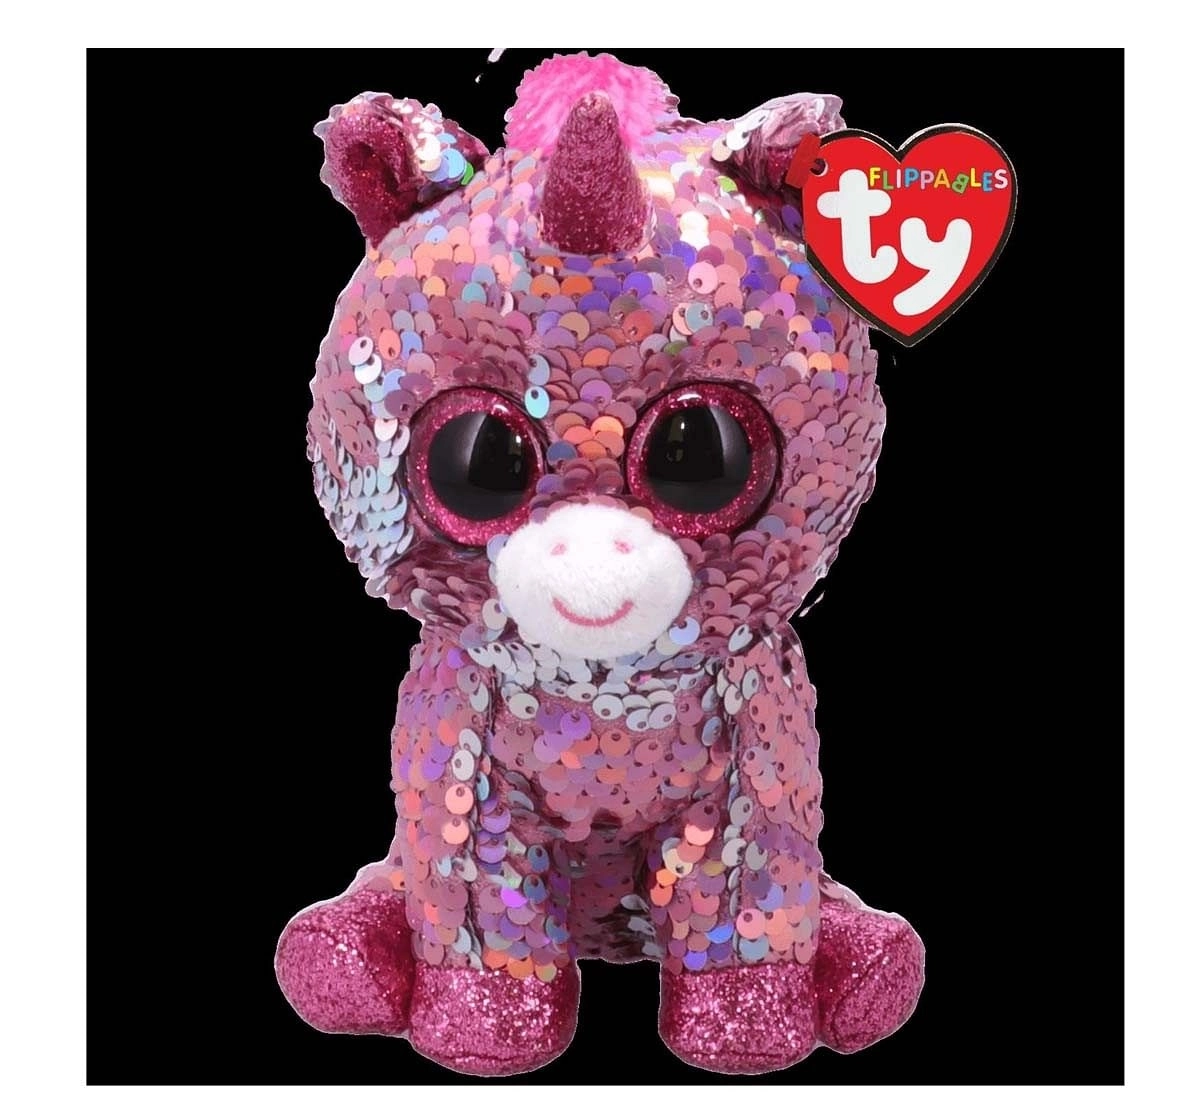 Ty Toys Sparkle - Unicorn Reg Flippables Quirky Soft Toys for Kids Age 3Y+ - 15 Cm